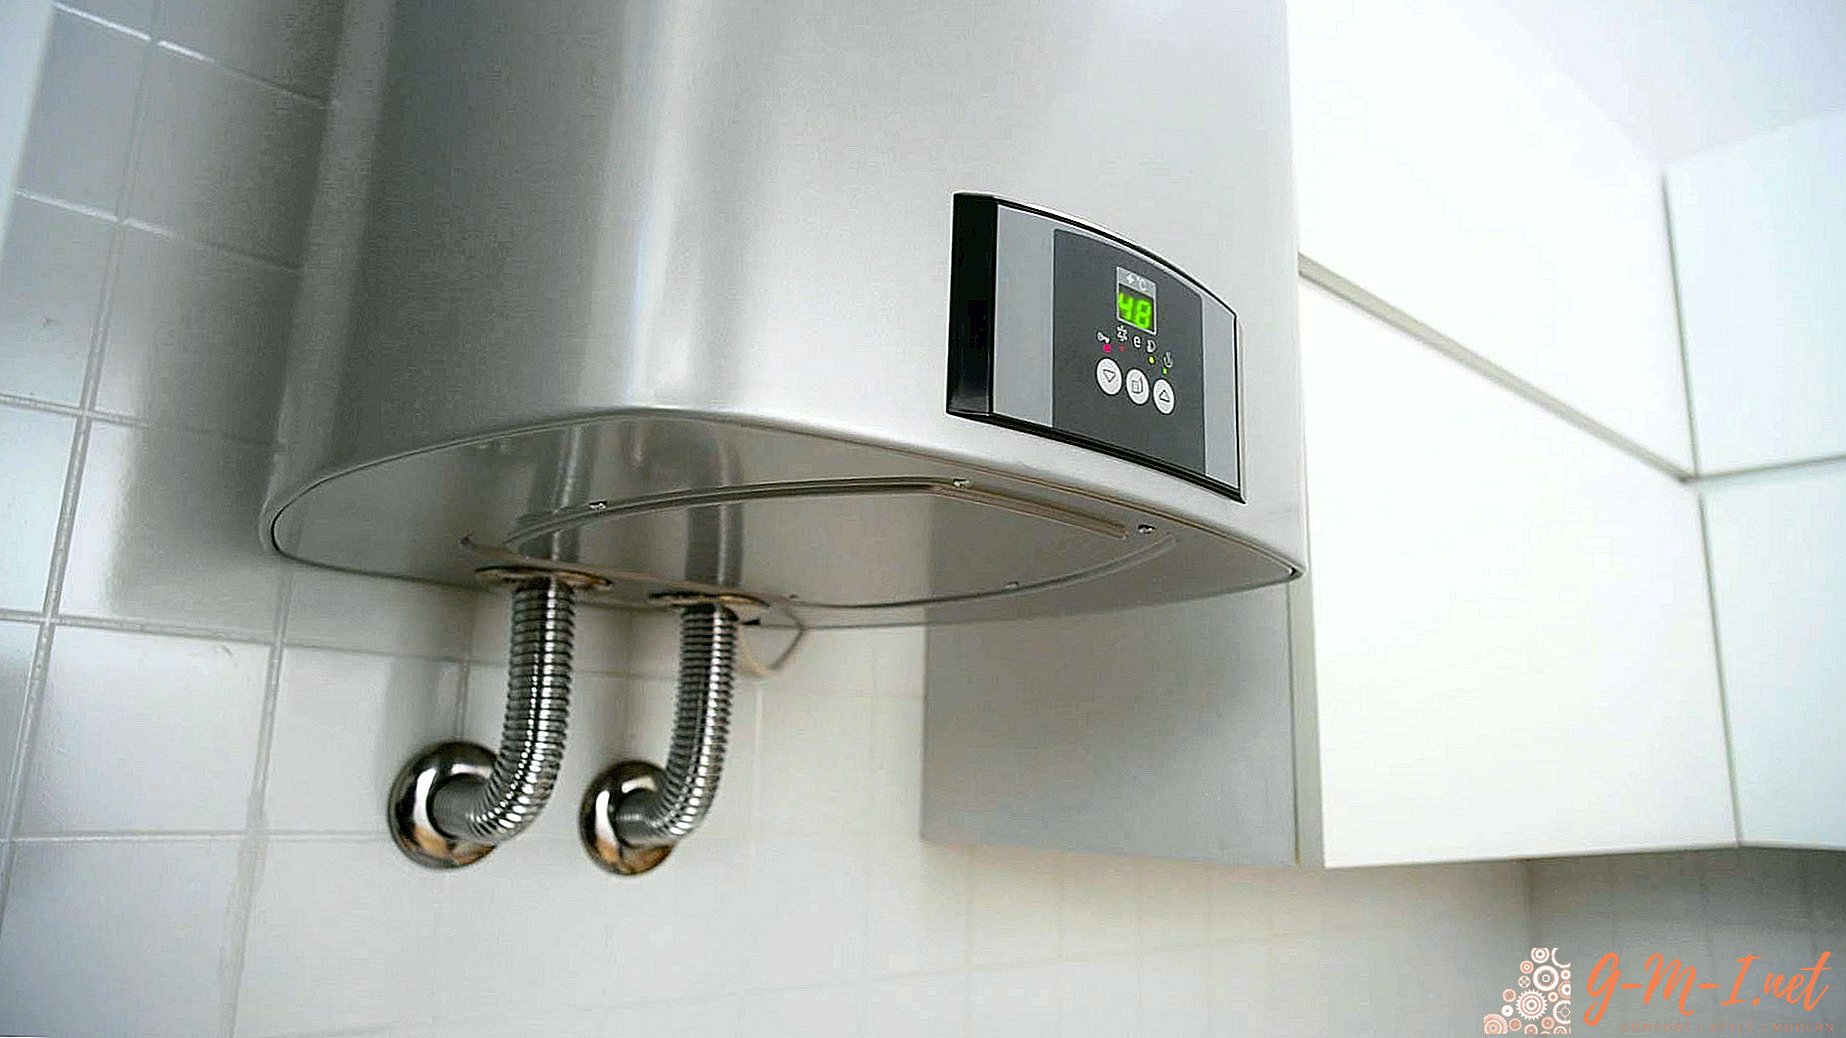 Which is better - storage or instantaneous water heater